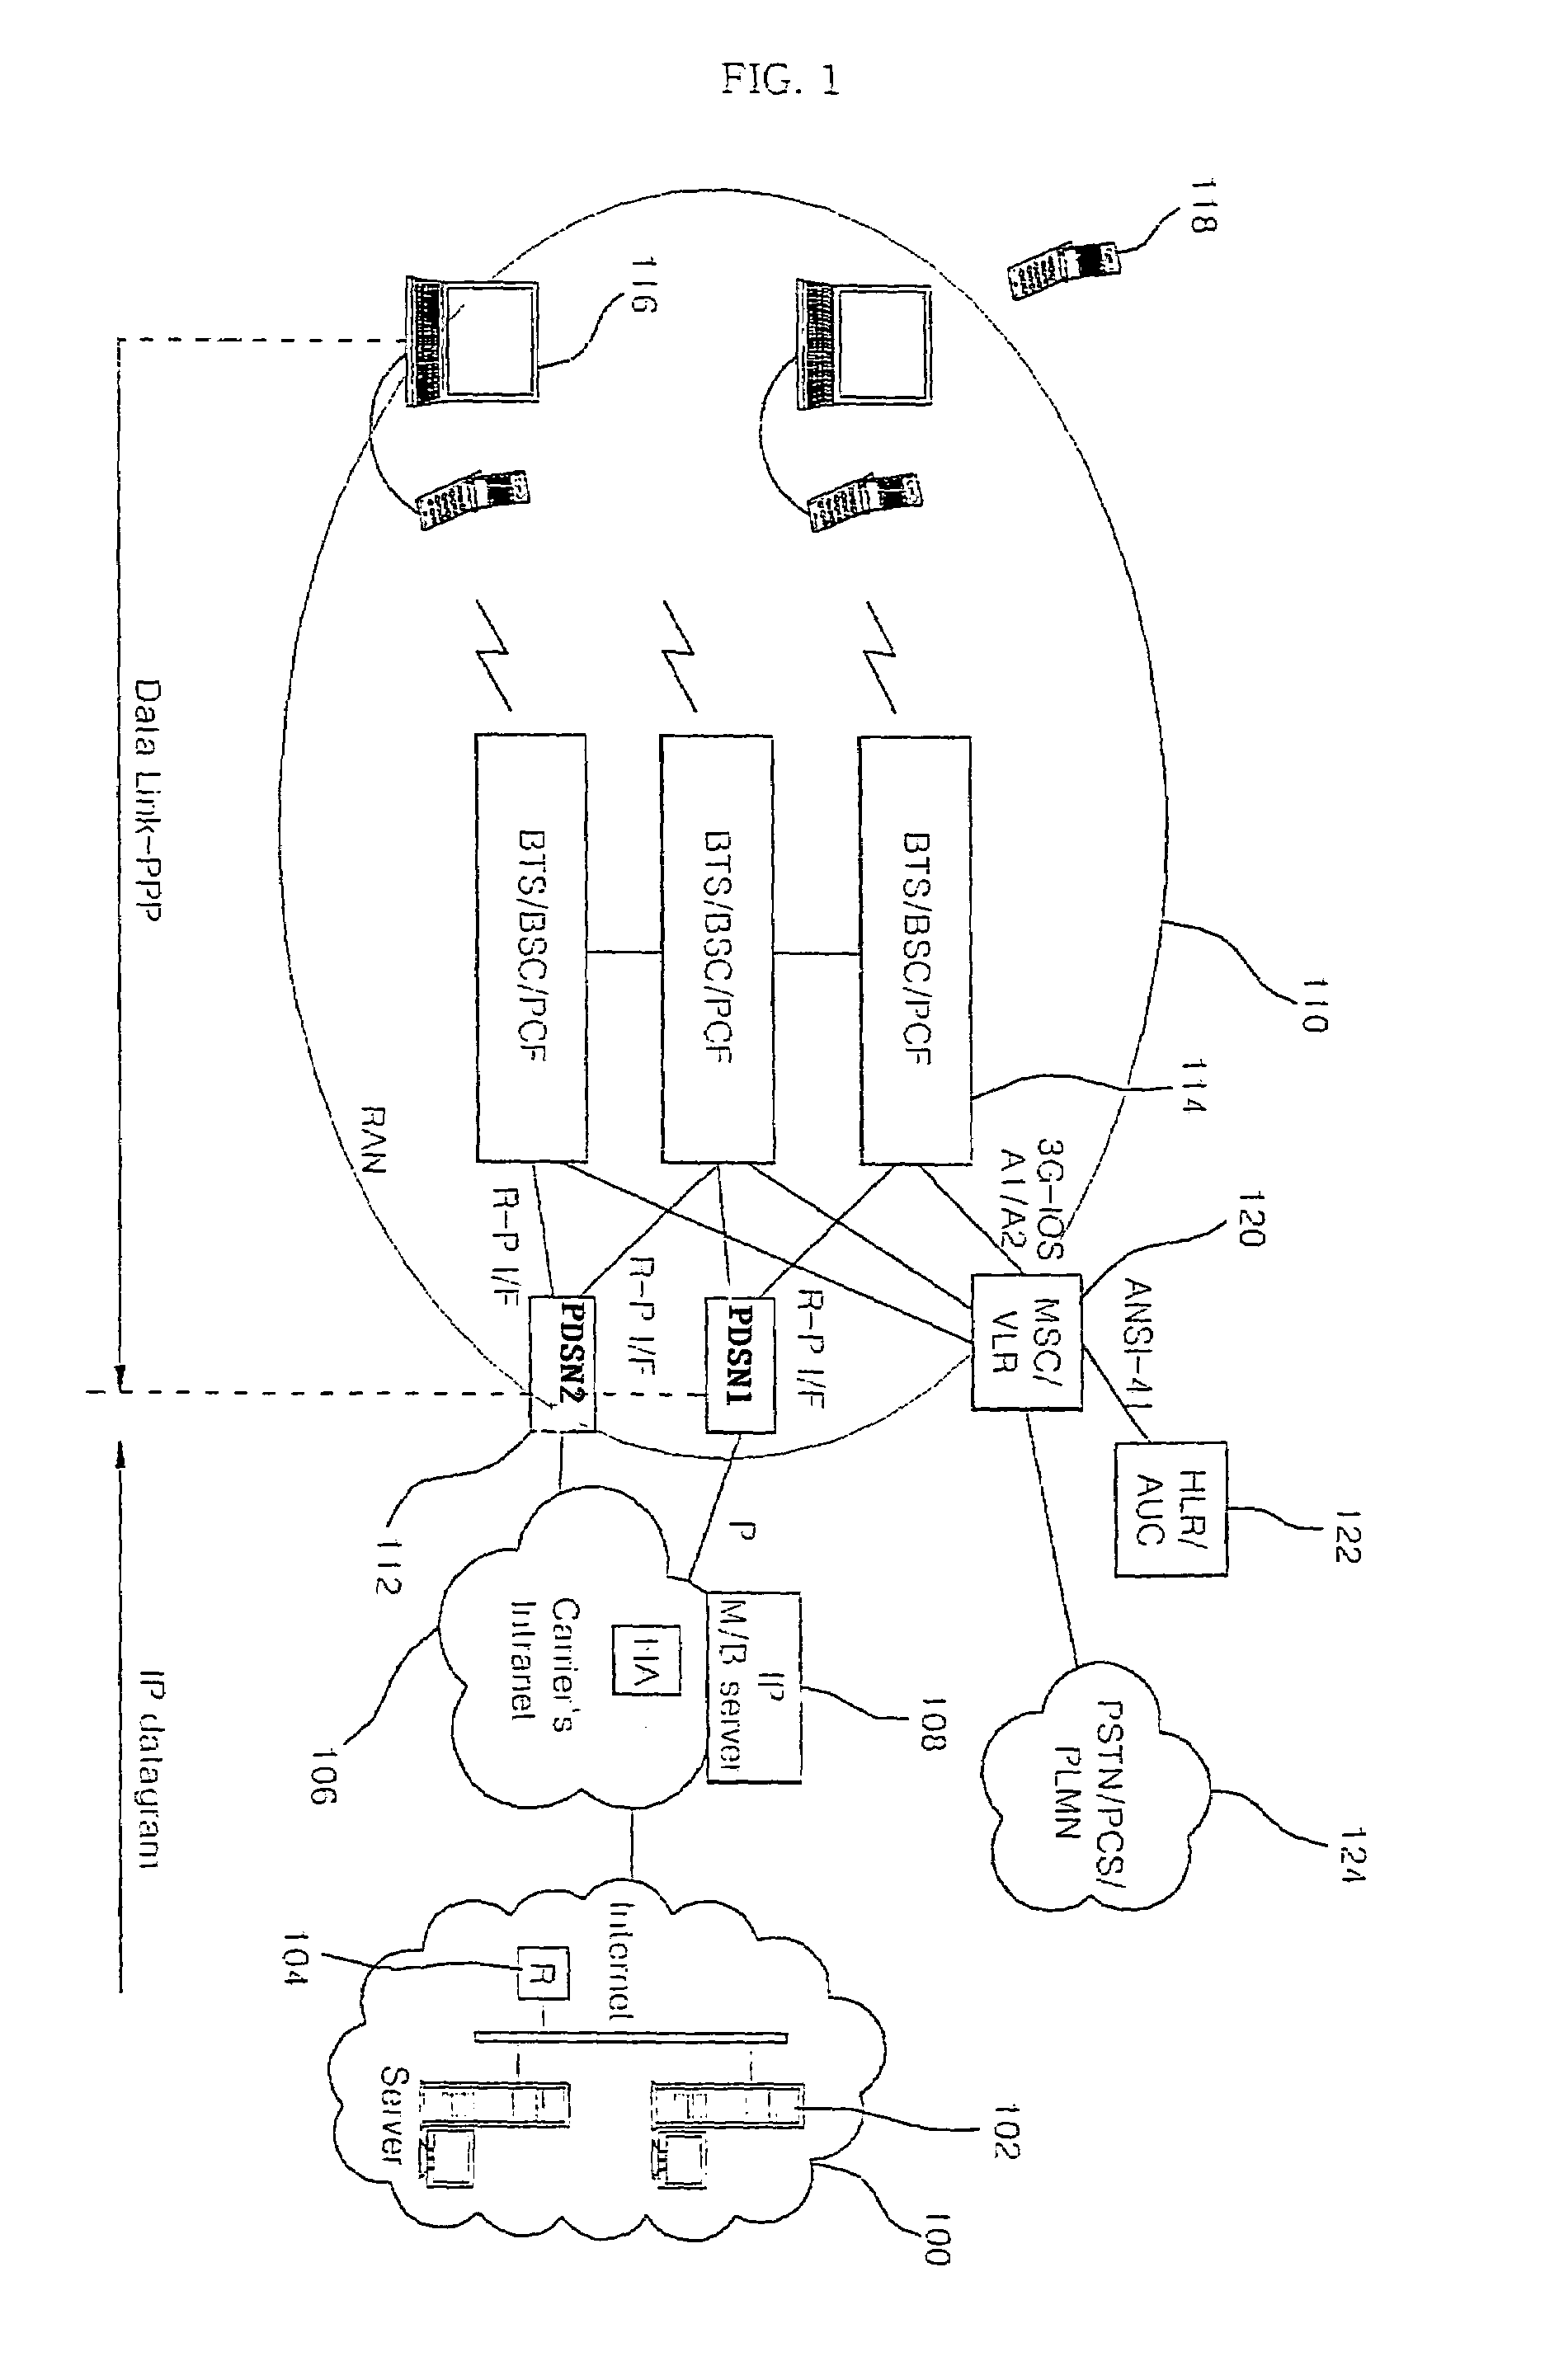 Apparatus and method of realizing link access control protocol for IP multicasting packet transmission in a mobile communication network